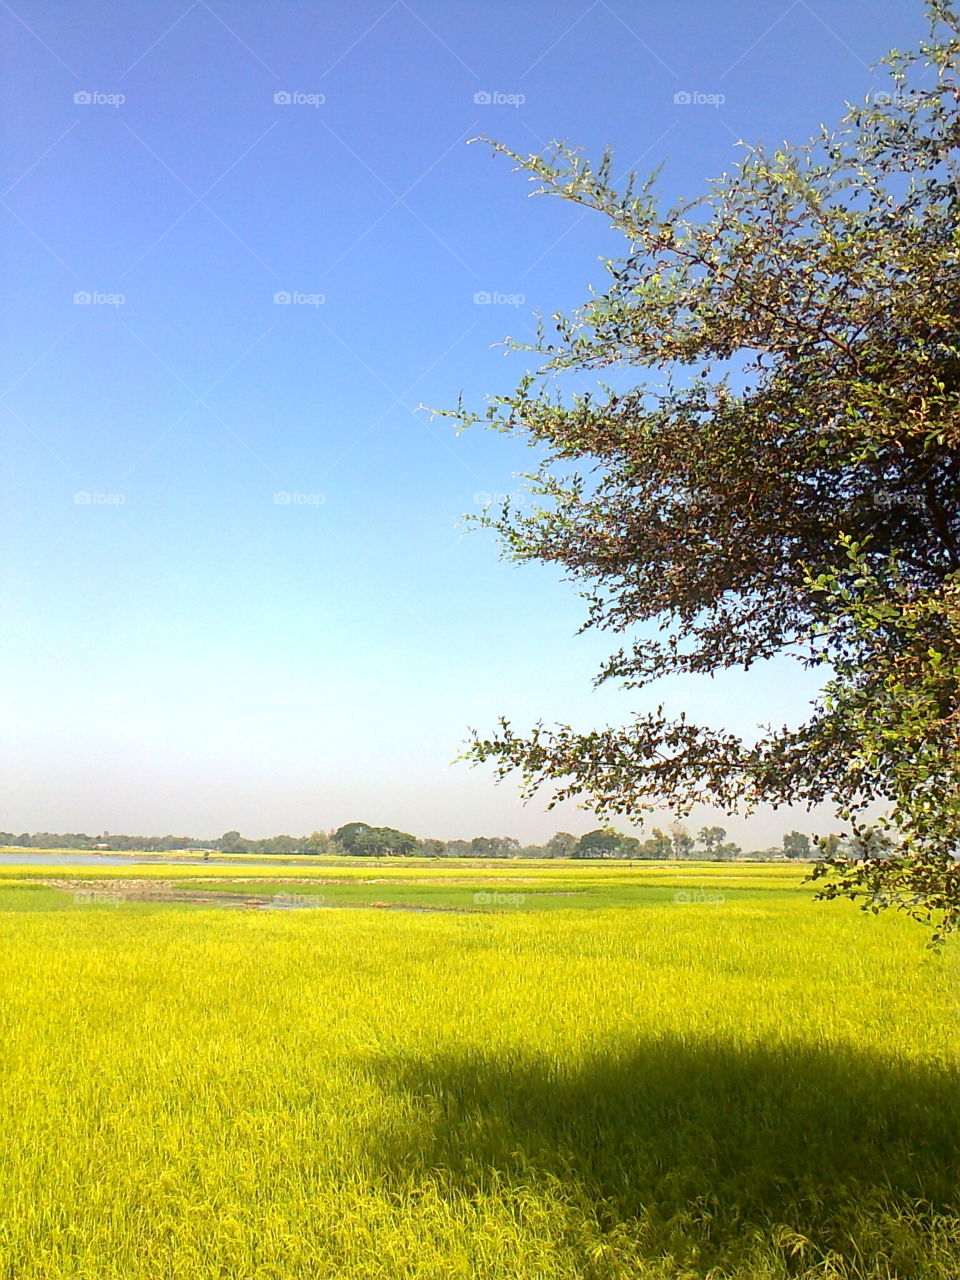 rice fields. countryside crops field in Bangladesh